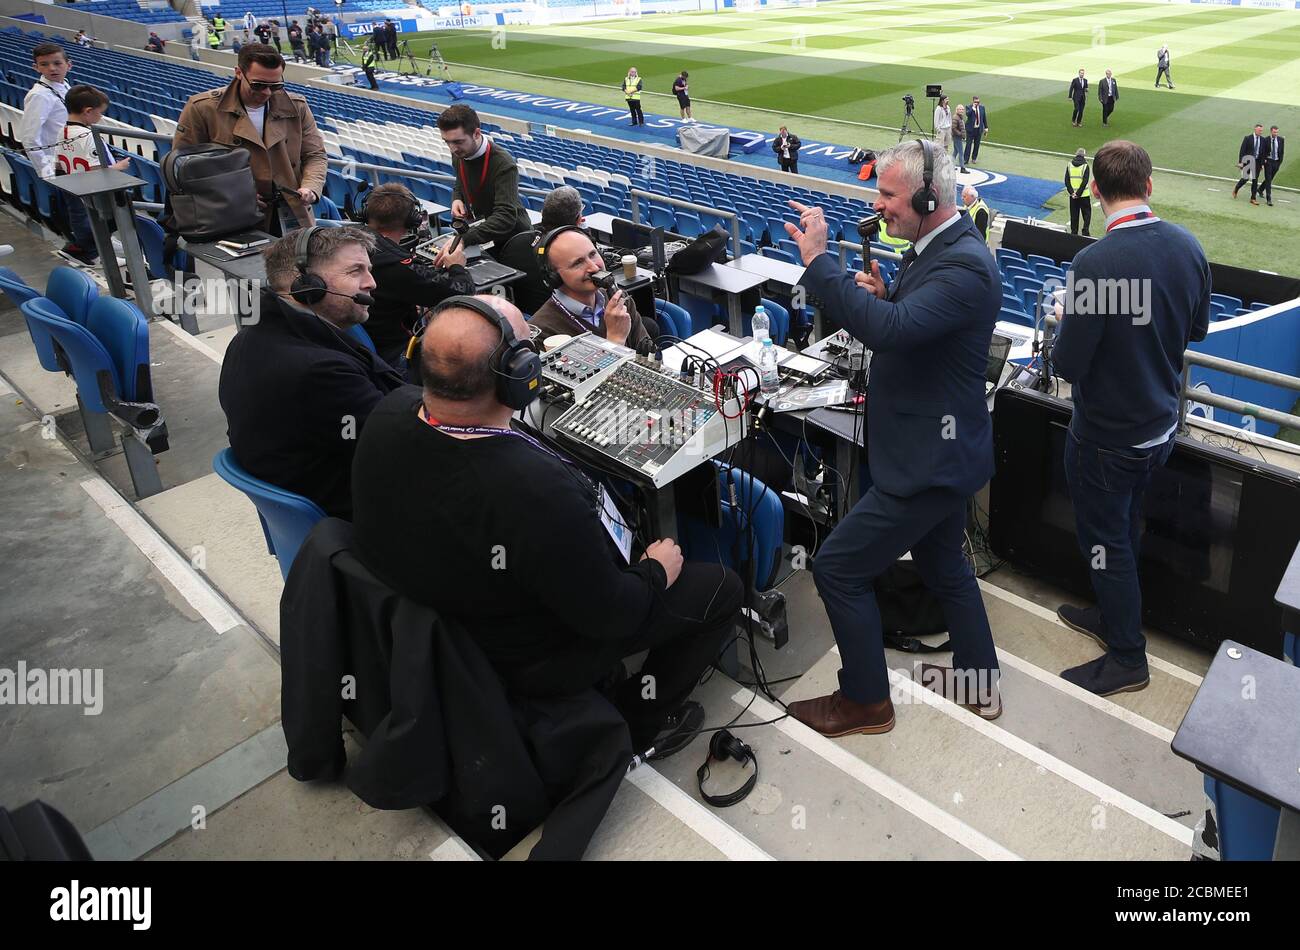 BBC TV Match of the Day Commentator Guy Mowbray (centre) talks with Radio 5  Live Mark Chapman and BBC Radio 5 Live John Murray in the stands during the  Premier League match